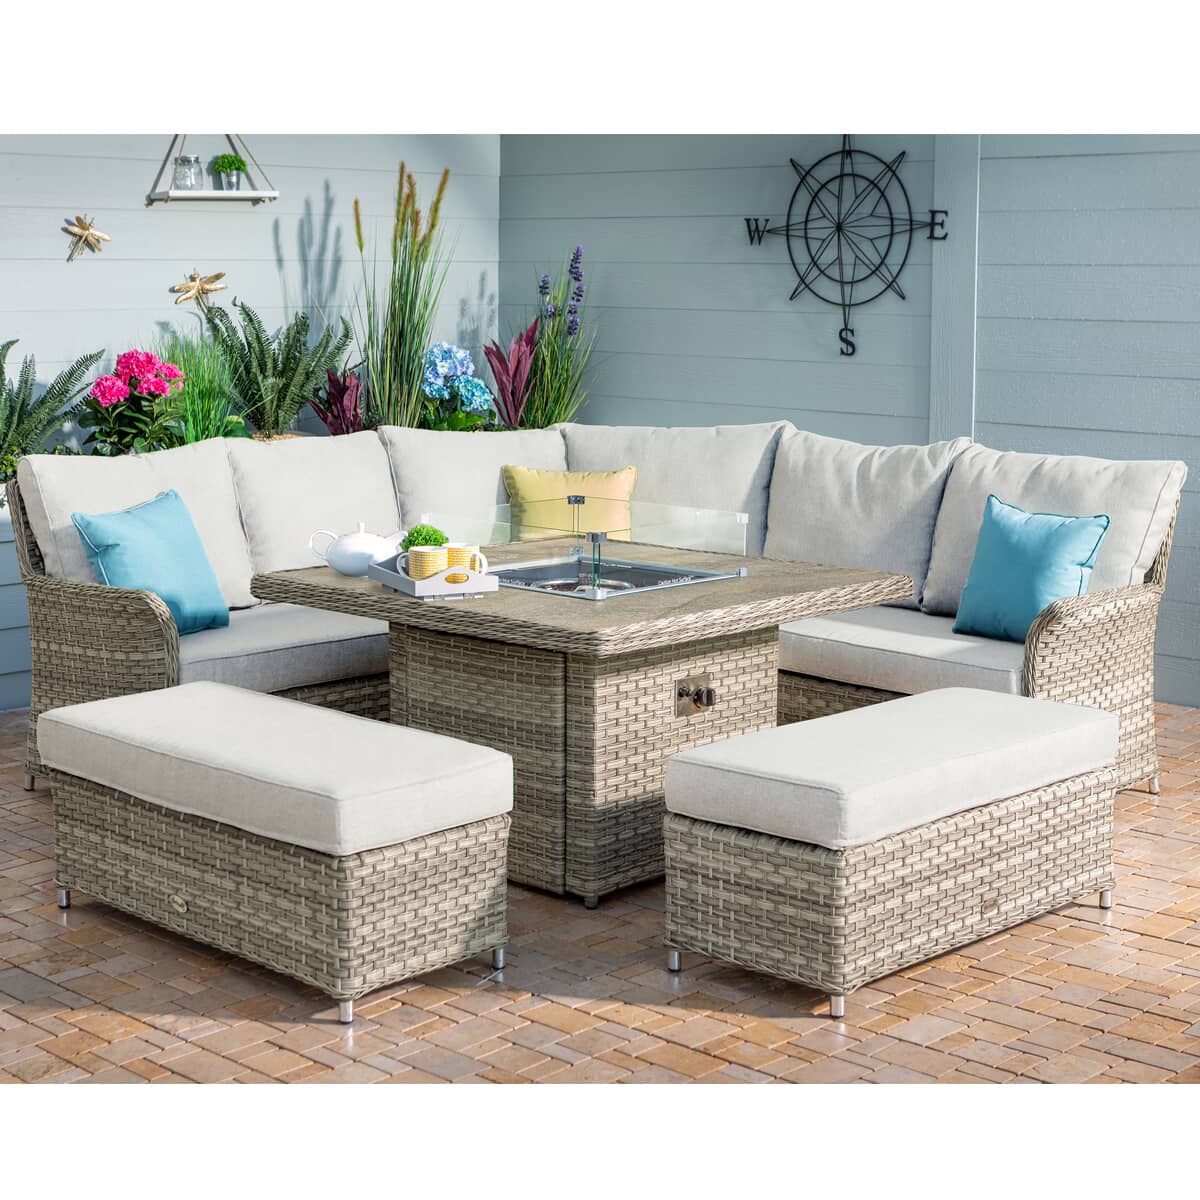 Hartman Heritage Tuscan Grand Square Casual Dining Corner Set with Gas Fire Pit Beech/Dove